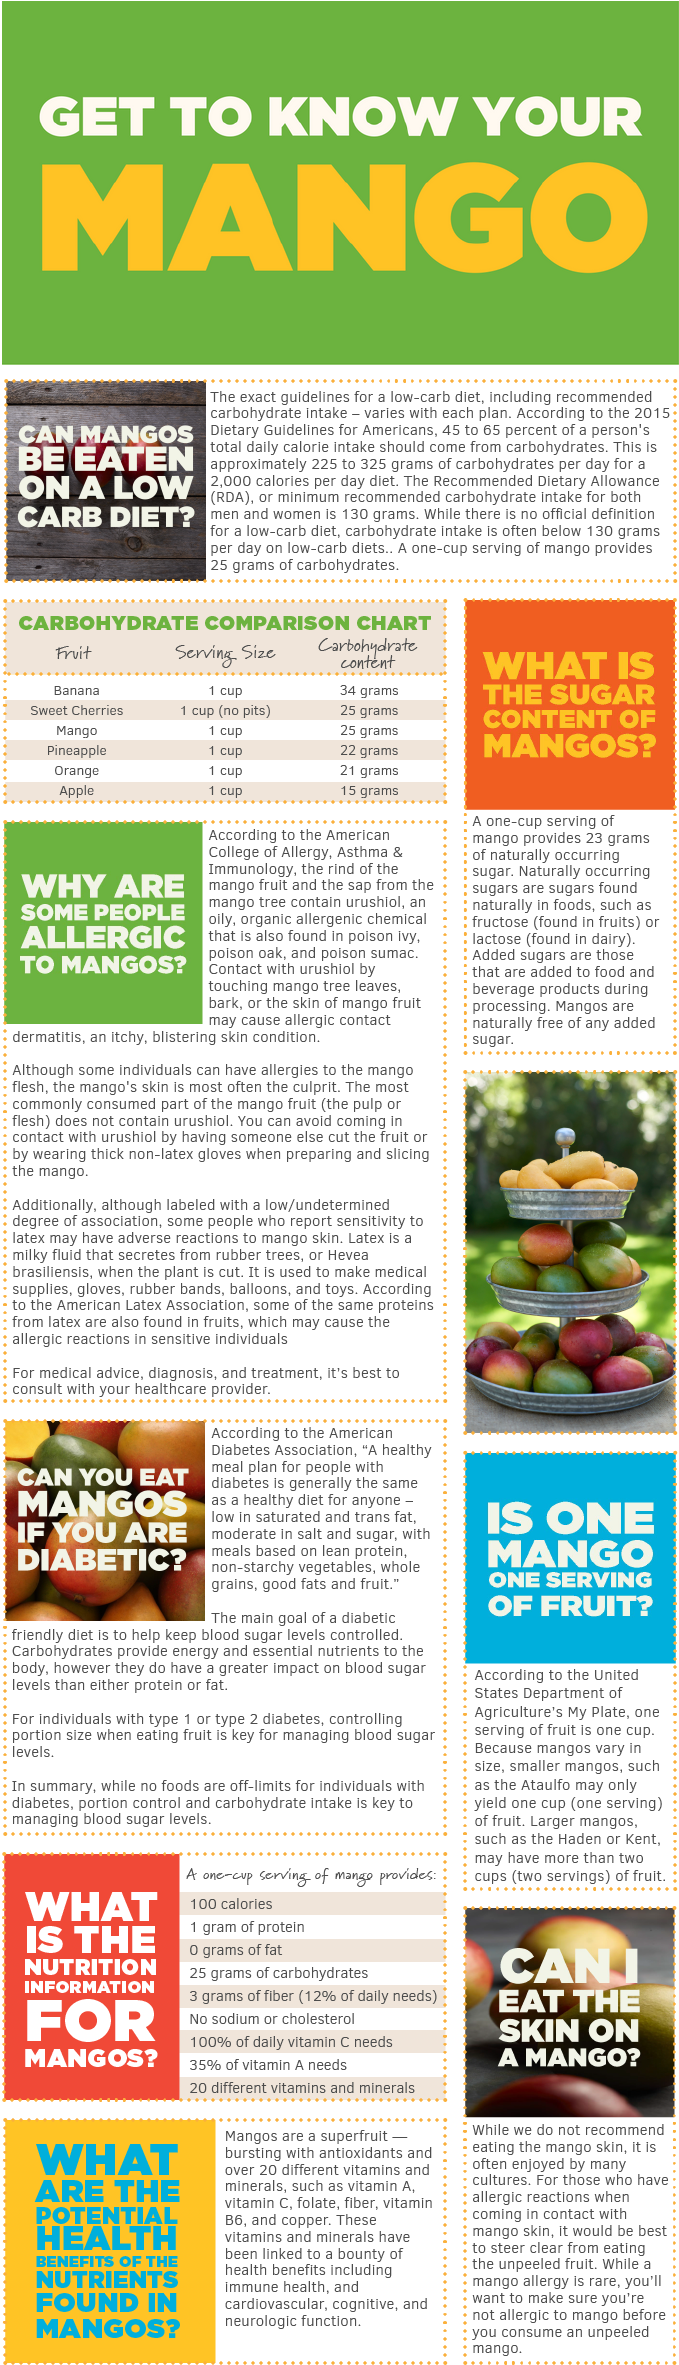 Faq-page - Flyer (686x2364), Png Download